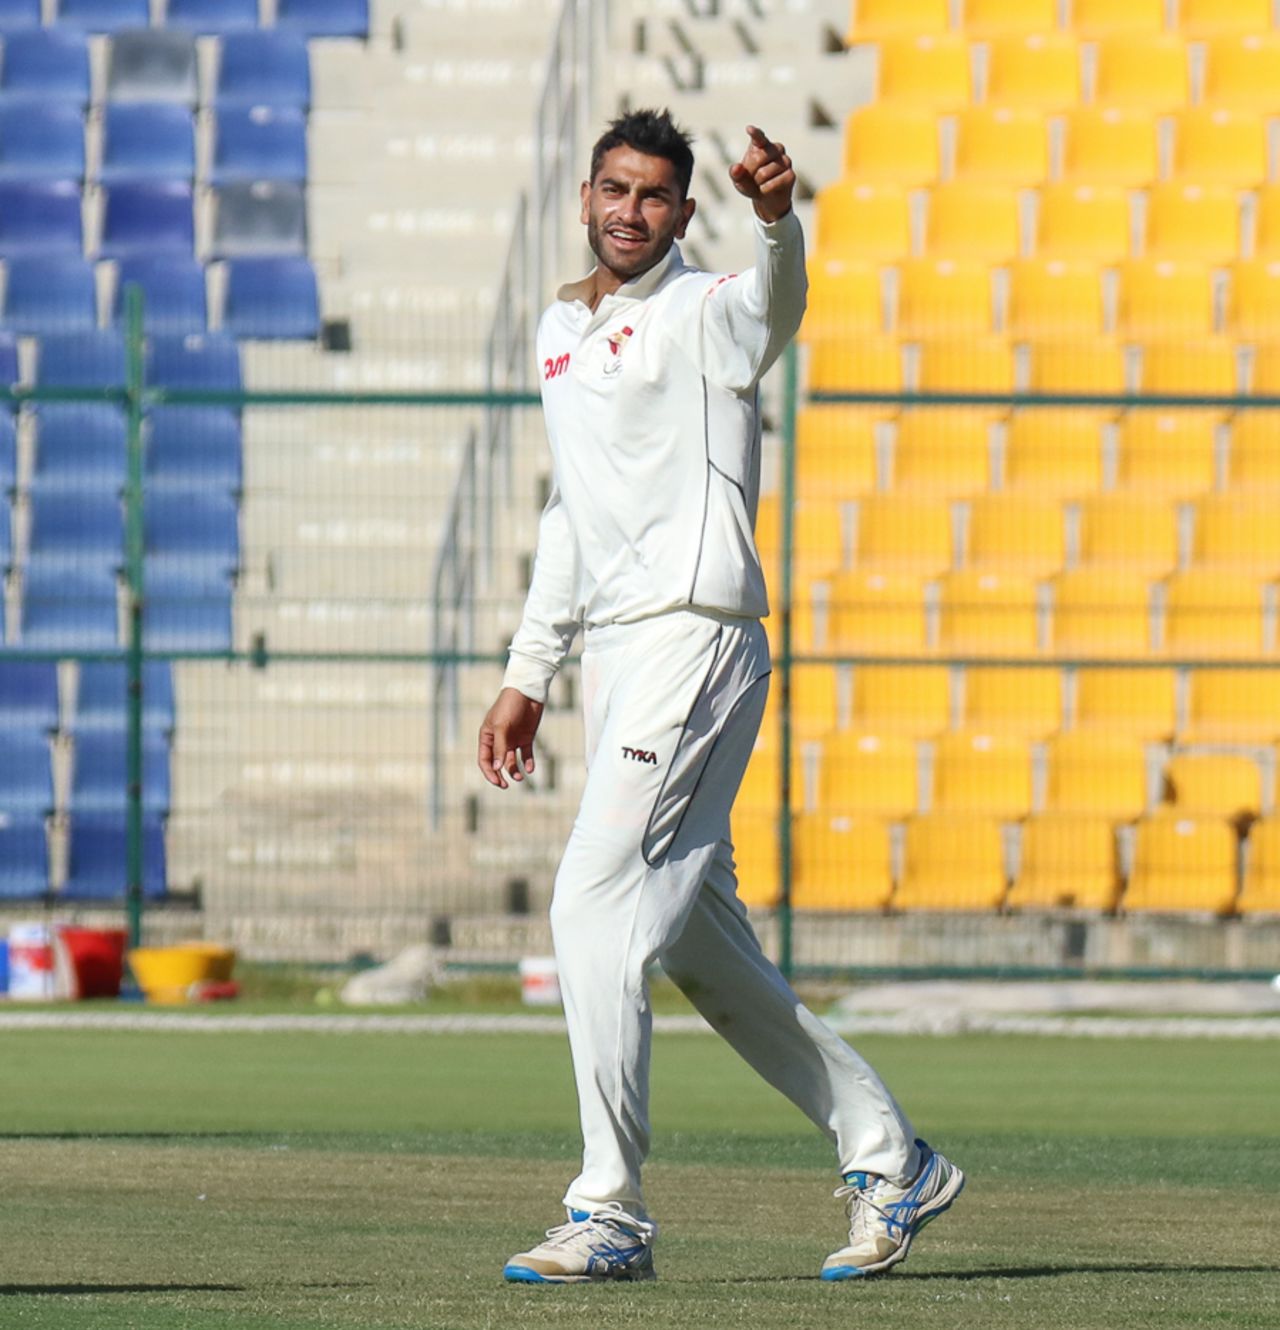 Ahmed Raza celebrates after taking his first wicket of the match, UAE v Afghanistan, 2015-17 Intercontinental Cup, 1st day, Abu Dhabi, November 29, 2017